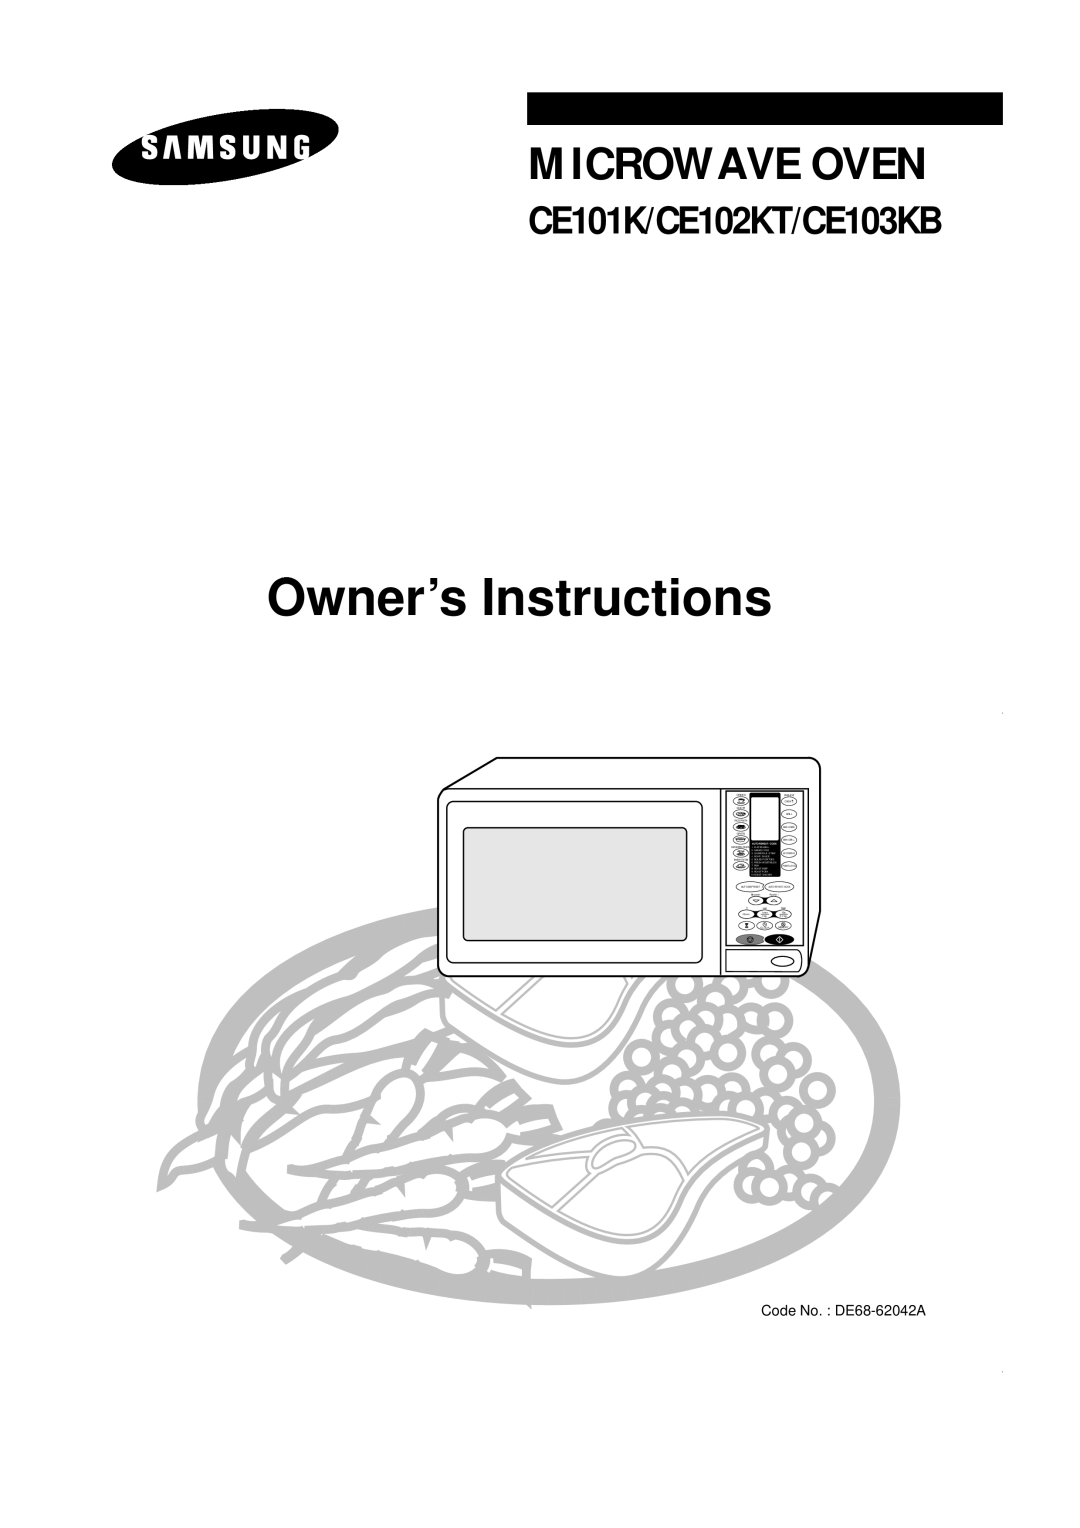 Samsung manual Owner’s Instructions, Microwave Oven, CE101K/CE102KT/CE103KB, Pla Ted Meal, Canned Food, Soup / Sauce 